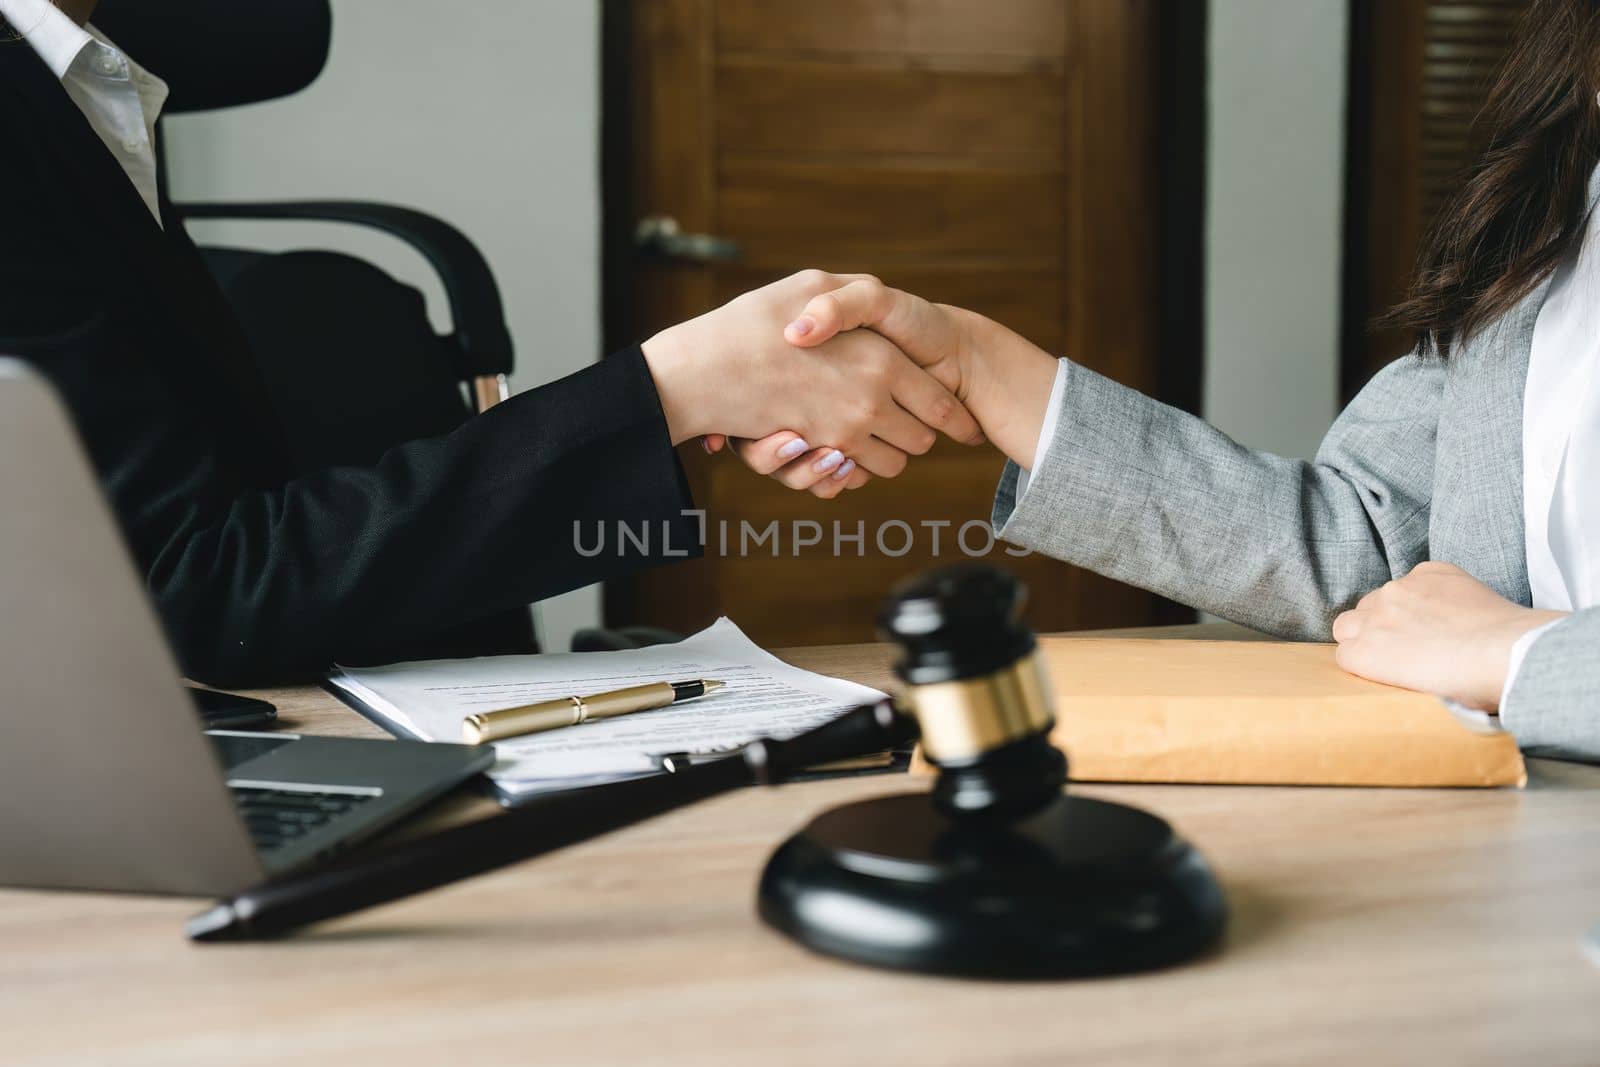 Gavel Justice hammer on wooden table with judge and client shaking hands after adviced in background at courtroom, lawyer service concept.